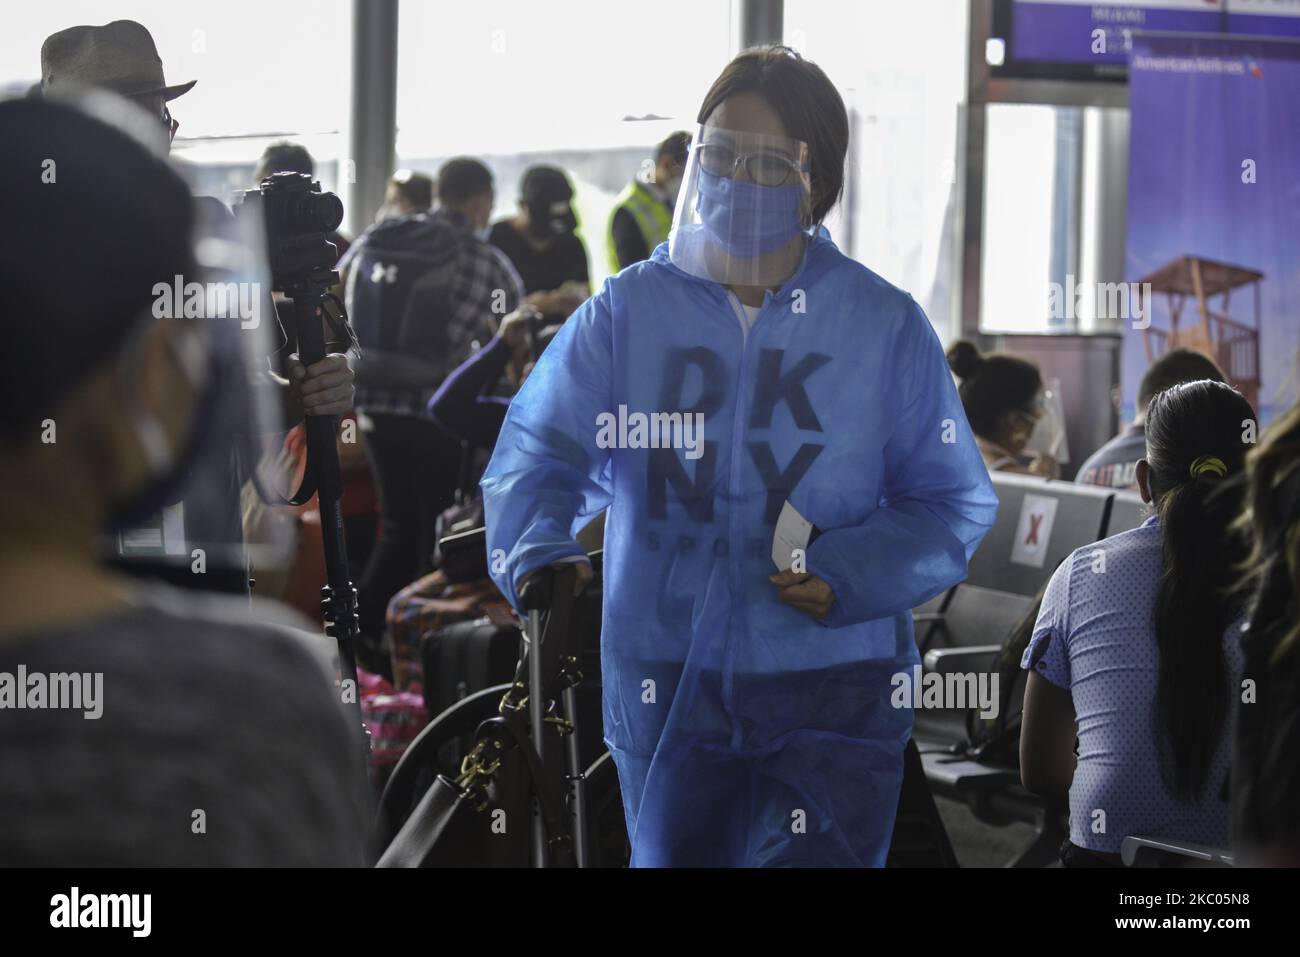 A tourist travels with special anti-pandemic clothing at La Aurora International Airport, in Guatemala City, Guatemala on Friday, September 18. The airport opens its international flight operations, and remained closed for 6 months to prevent the spread of COVID-19. During the pandemic, 84,344 people were infected and 3,076 died. (Photo by Deccio Serrano/NurPhoto) Stock Photo